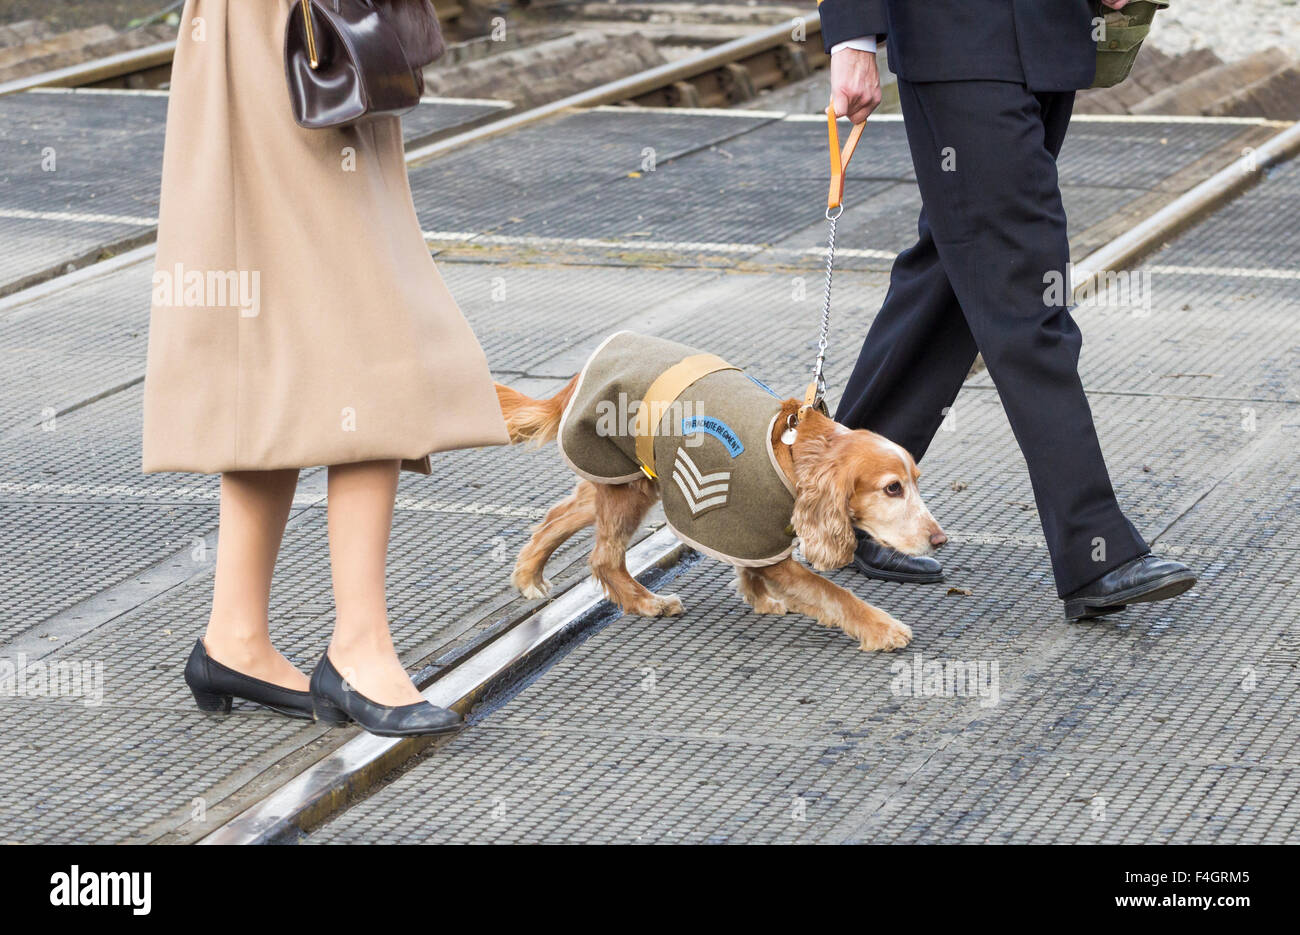 Pickering, North Yorkshire, UK. 17th October, 2015. Pickering`s annual Wartime and 40`s Weekend attracts thousands, with World War 2 living history camps and battle re-enactments amomg the attractions. PICTURED: Dog dressed appropriately for  Military street parade Stock Photo